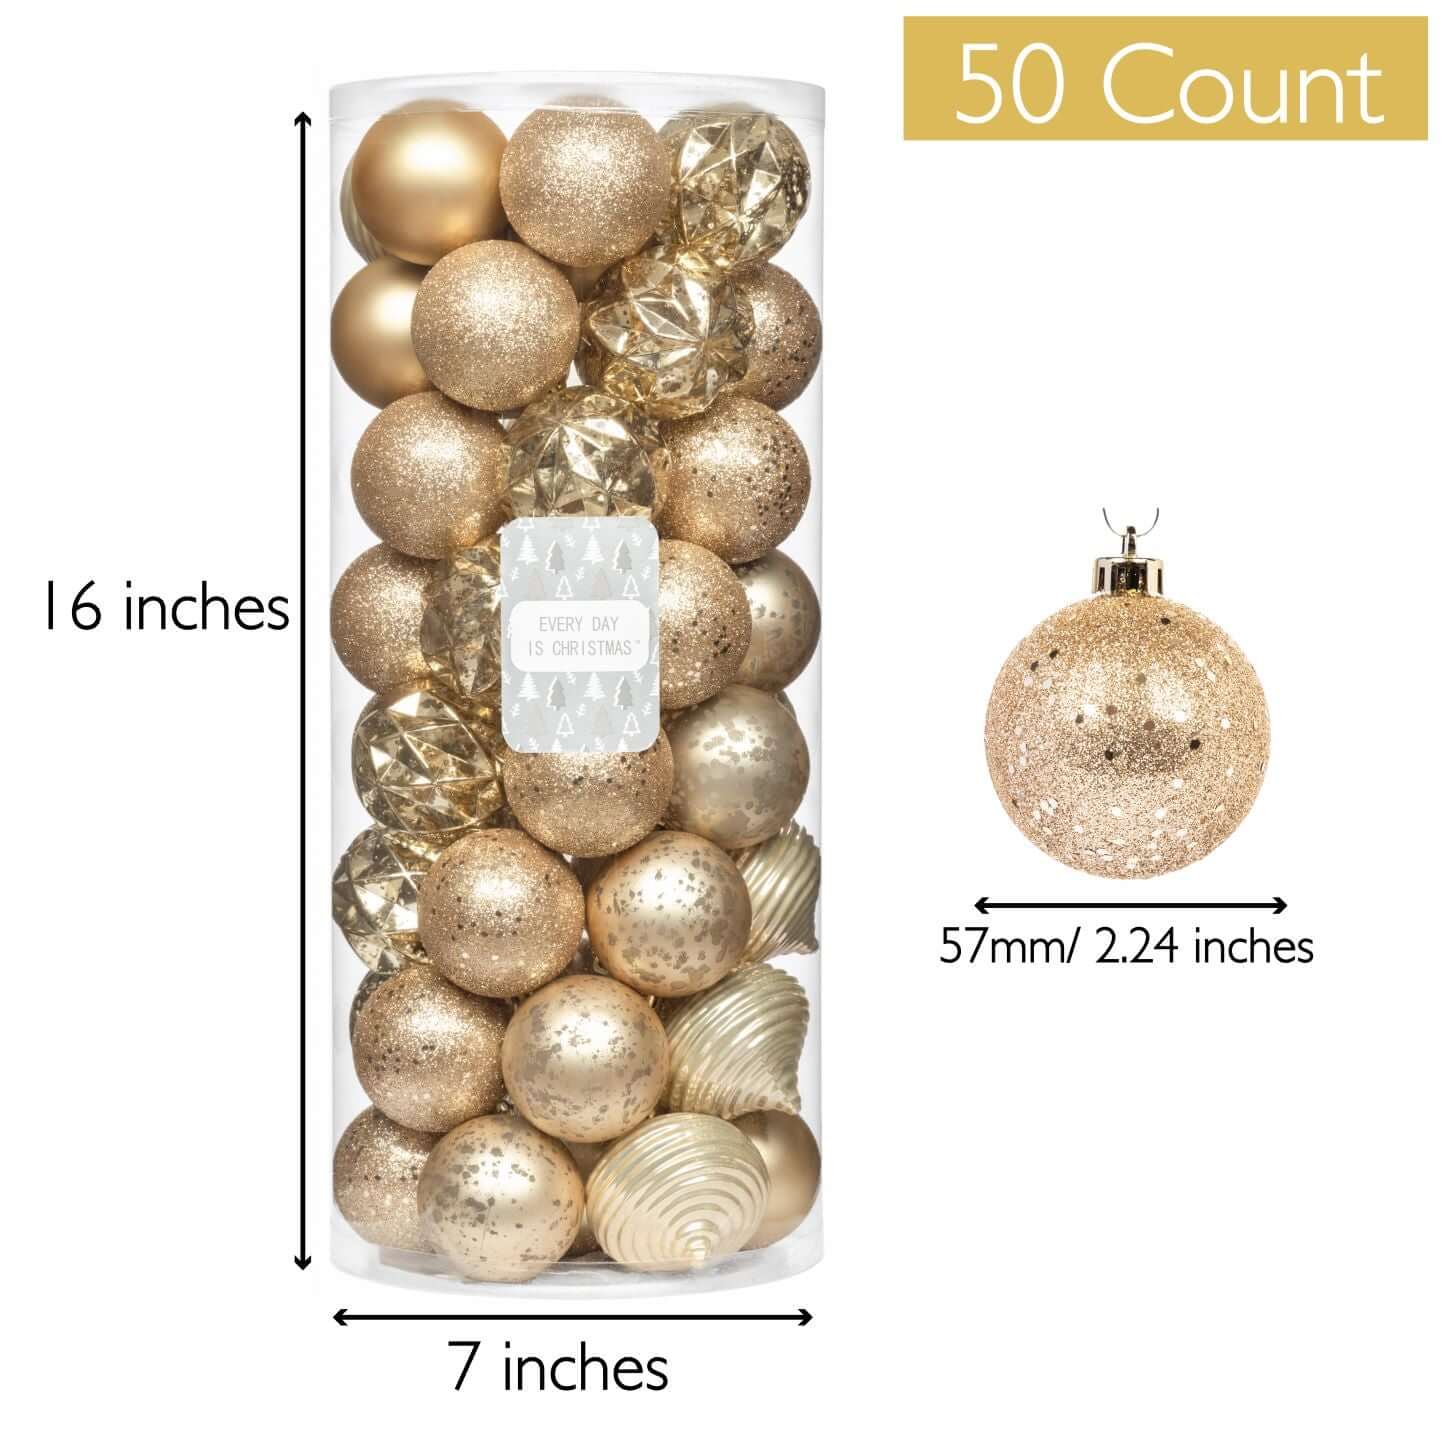 Every Day is Christmas 50ct 57mm/ 2.24' Christmas Ornaments